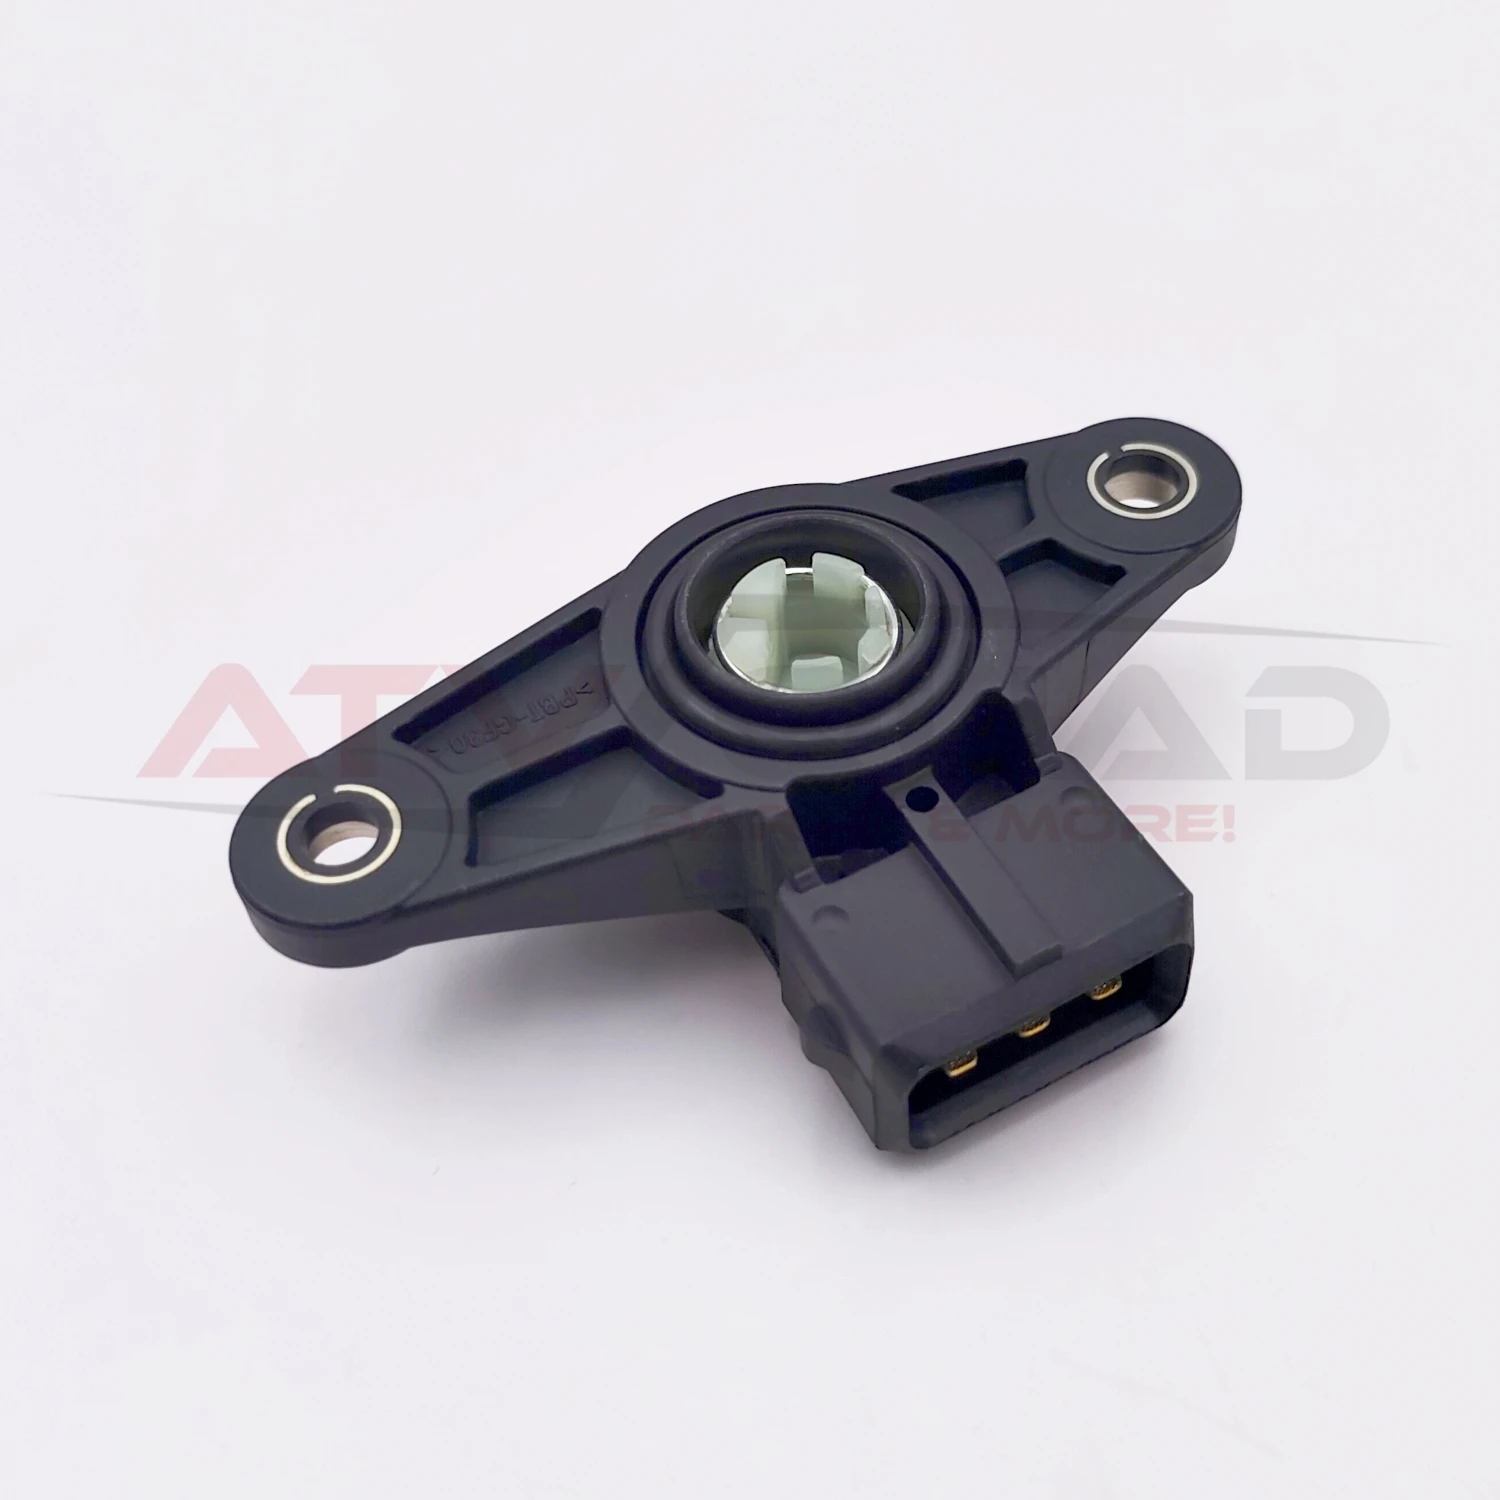 TPS Throttle Position Sensor for CFmoto 400NK 650NK 650MT 650GT Motorcycle 400 450 500S 520 600 Touring 625 ATV cfmoto motorcycle modifications 250nk gt400 650gt code meter instrument screen protector high definition protective film